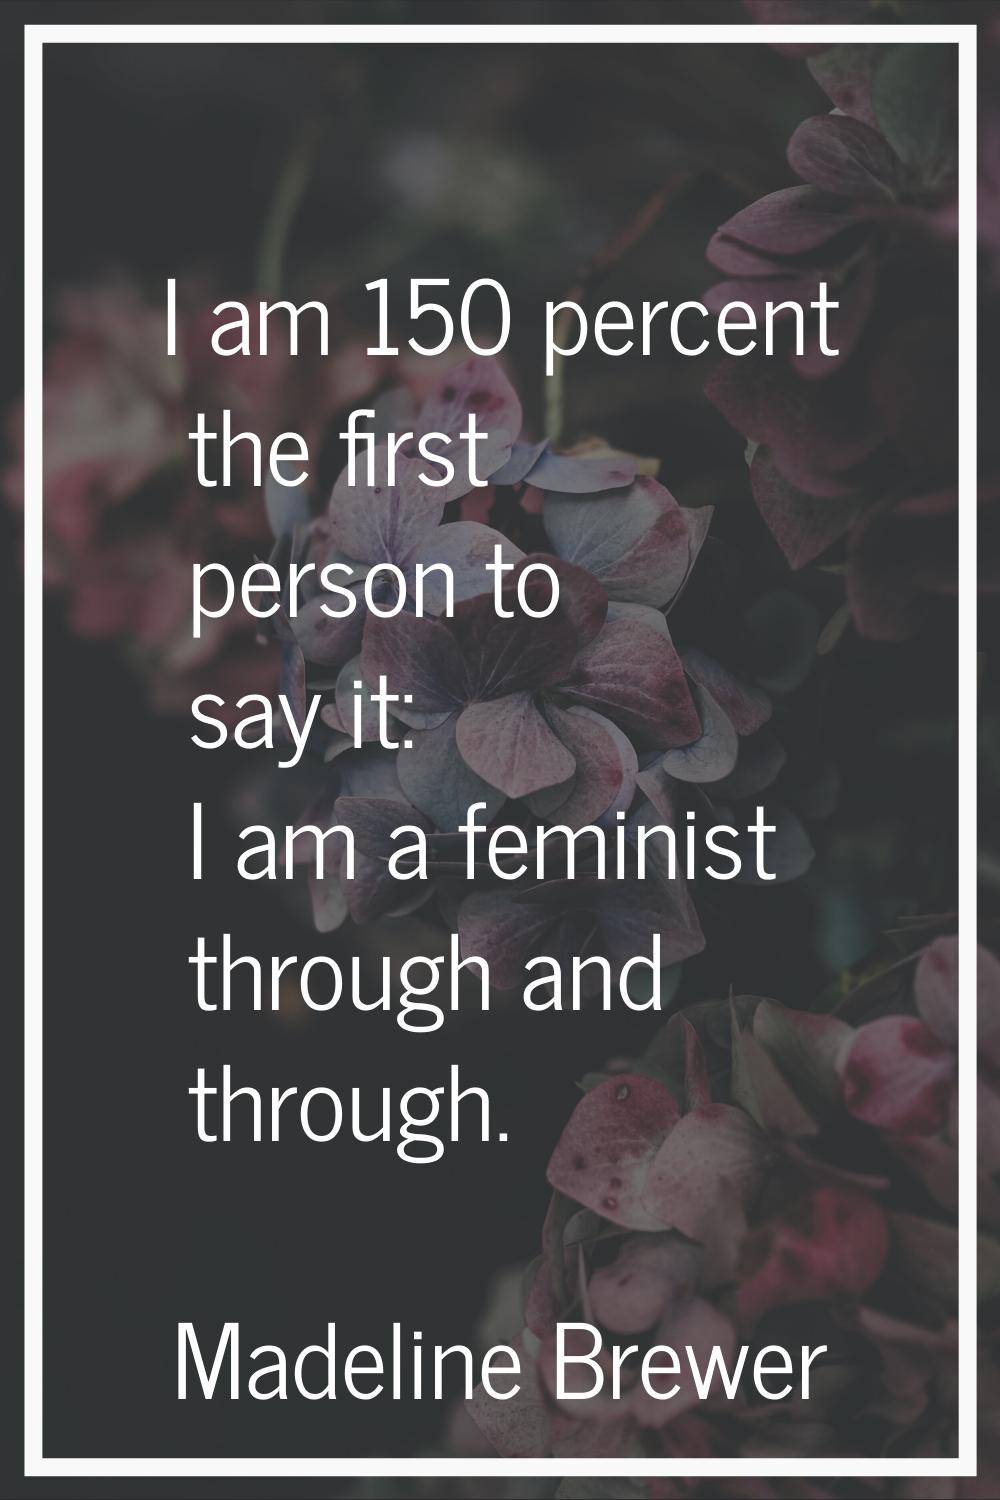 I am 150 percent the first person to say it: I am a feminist through and through.